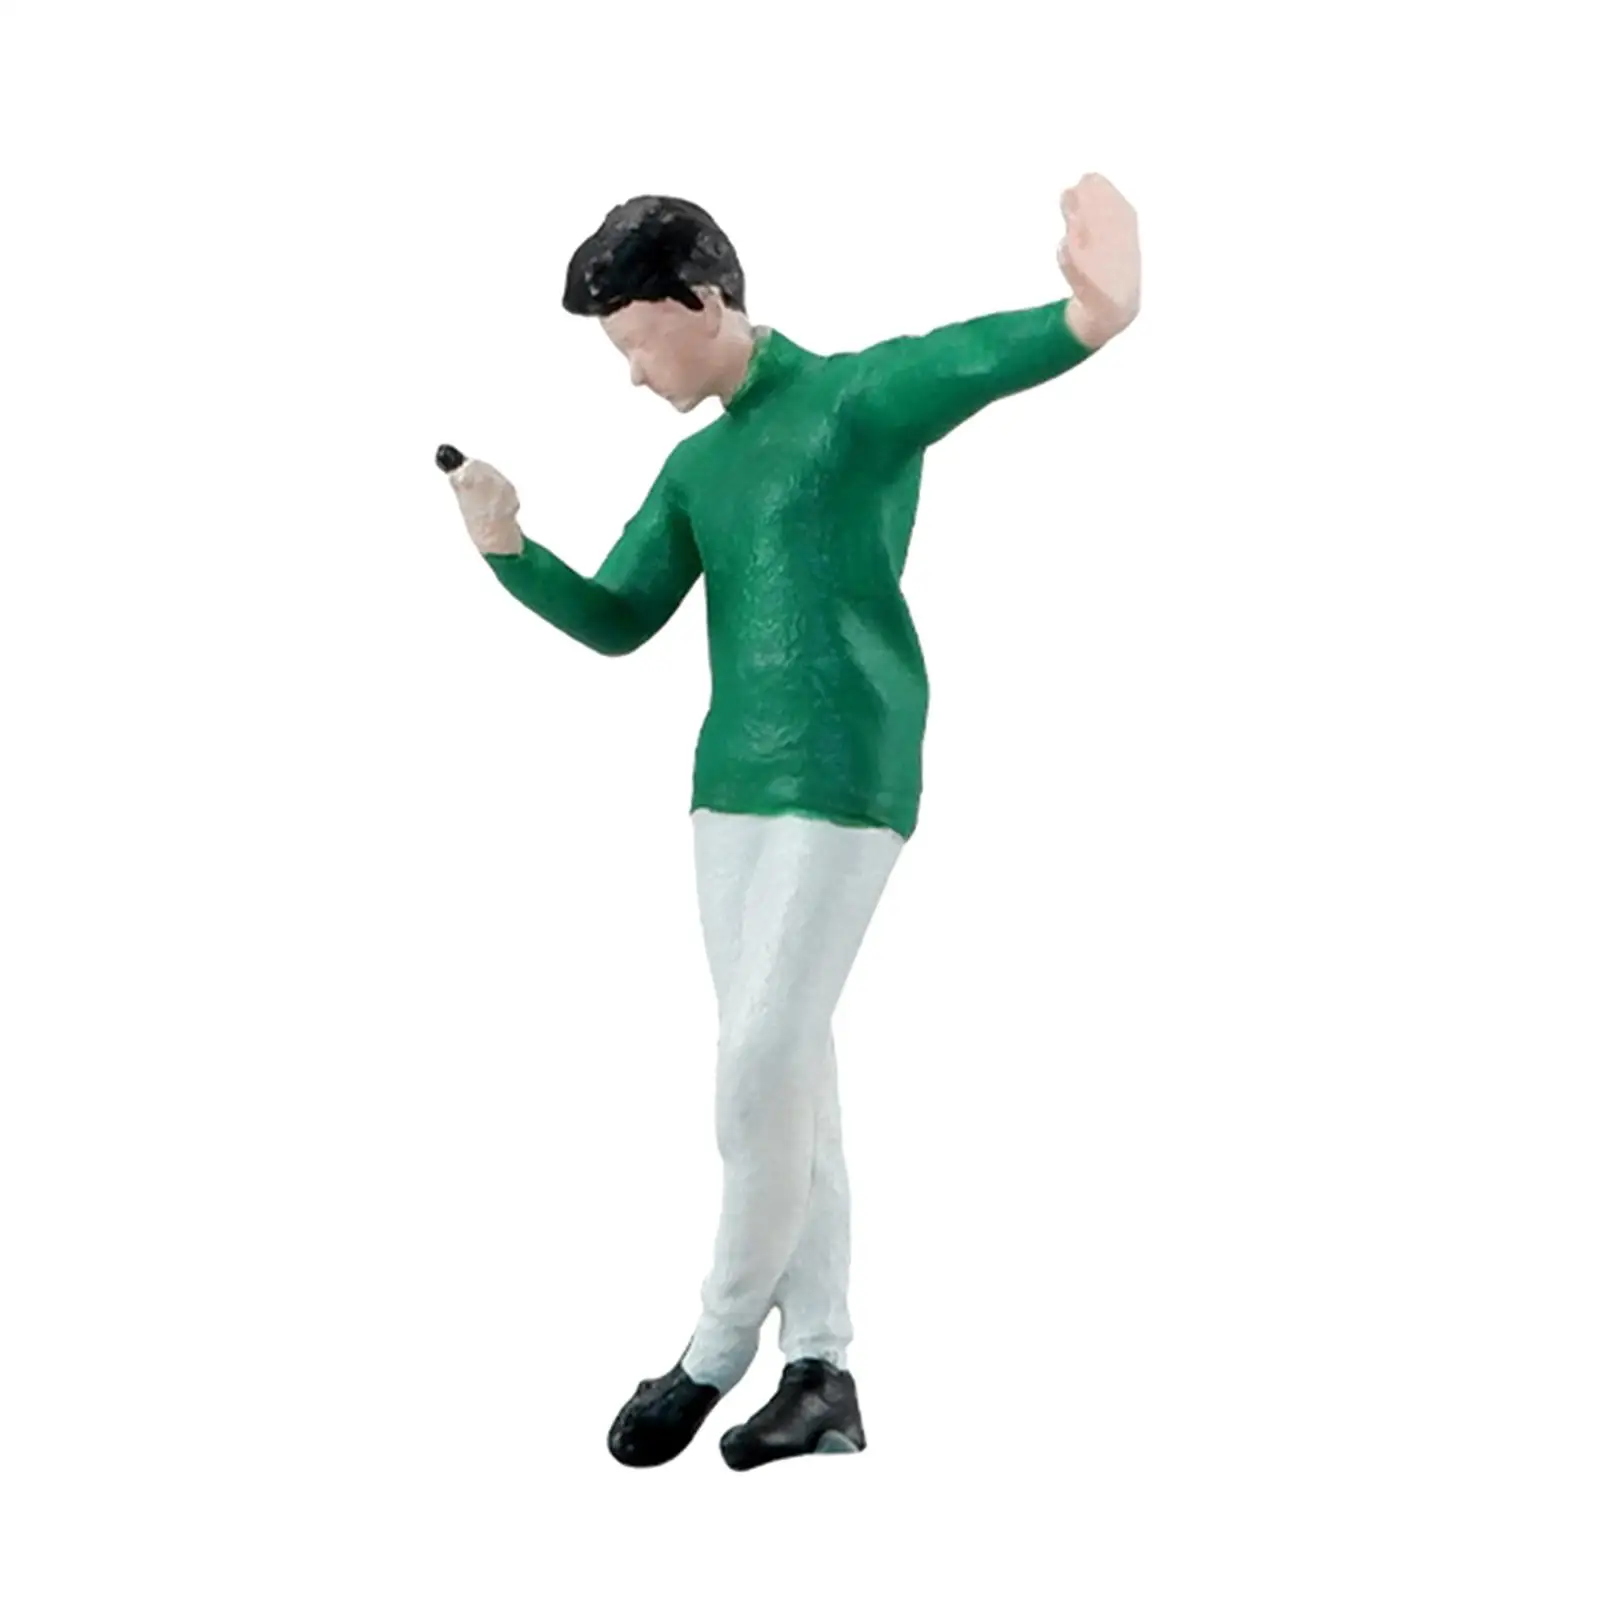 1:64 People Figures Green T Shirt Man DIY Crafts Miniature People Figurines for Dollhouse DIY Scene Diorama Ornament Accessories